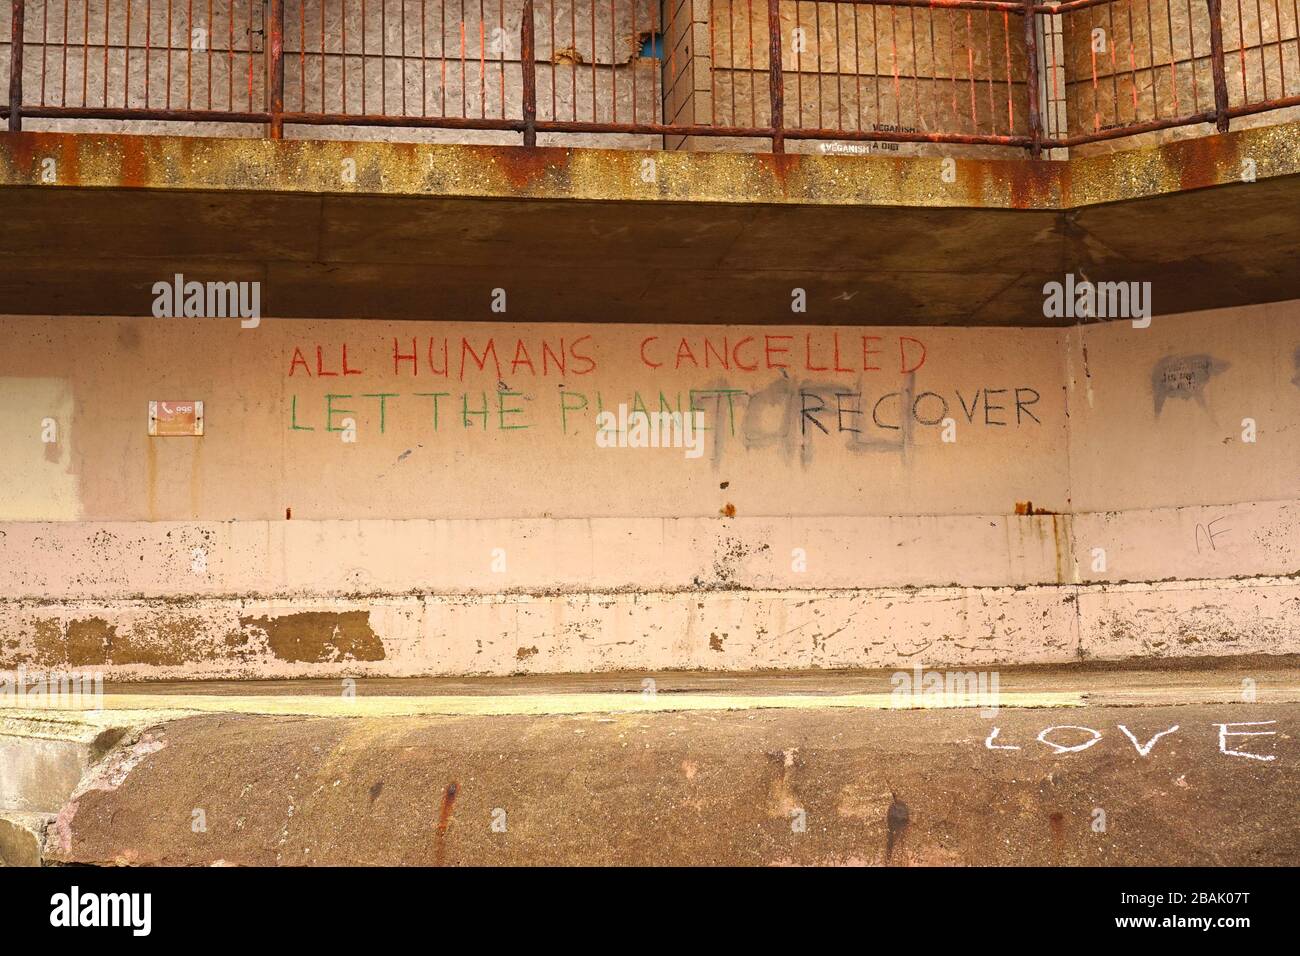 Graffiti on concrete wall that writes 'all humans cancelled let the planet recover' Stock Photo